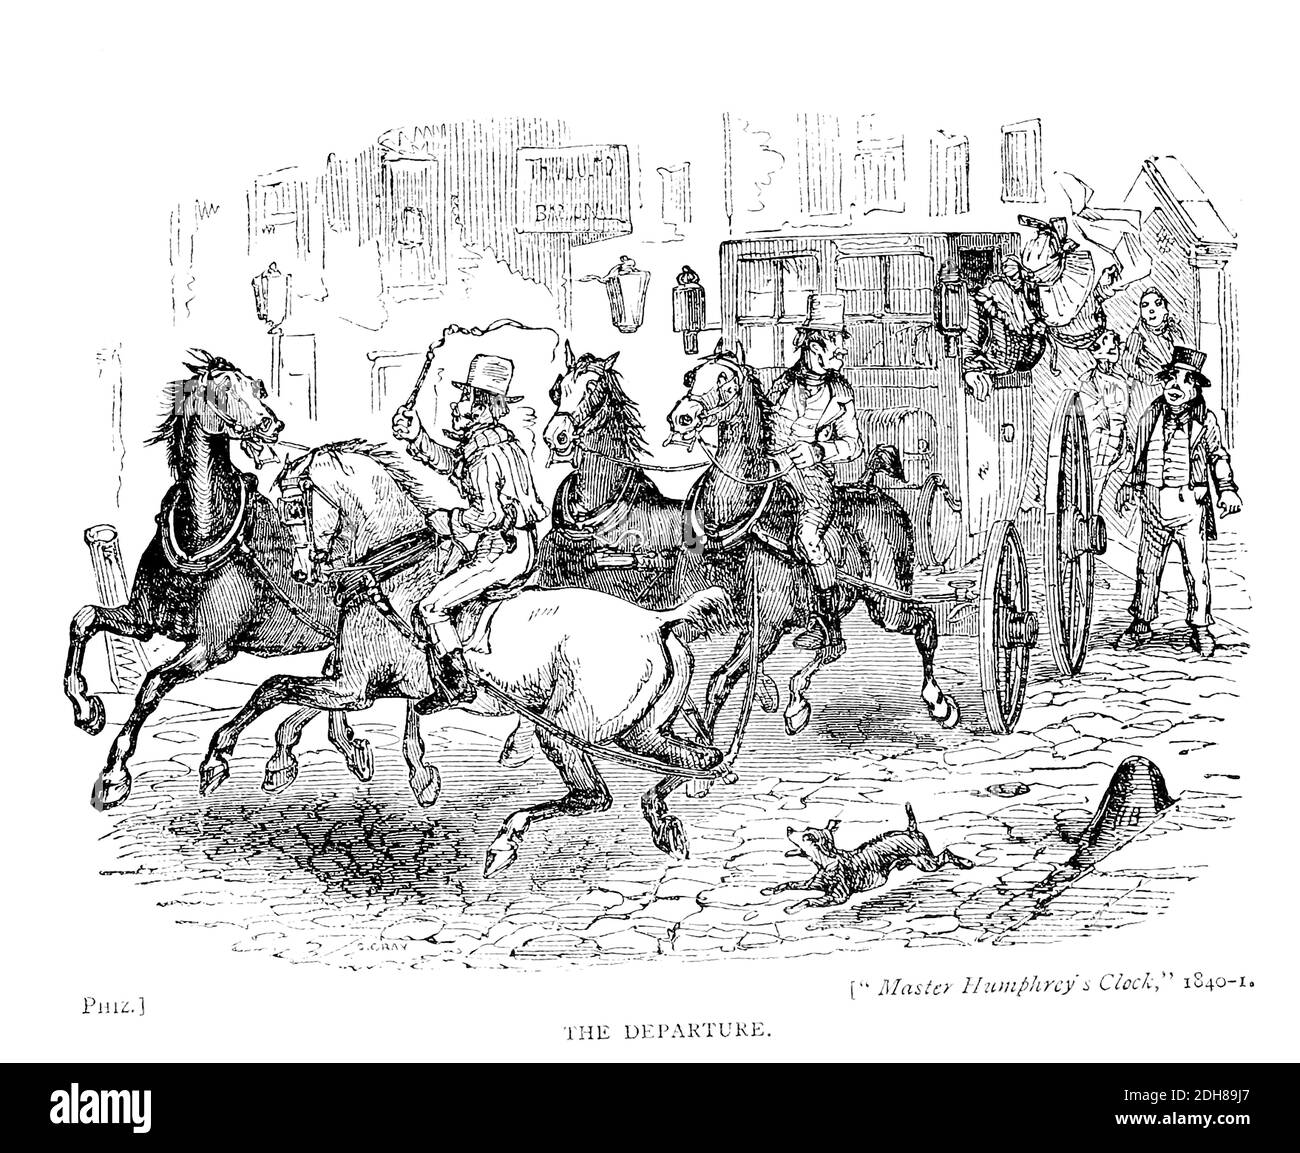 The Departure by Phiz [Hablot Knight Browne (10 July 1815 – 8 July 1882) was an English artist and illustrator. Well-known by his pen name, Phiz, he illustrated books by Charles Dickens, Charles Lever, and Harrison Ainsworth.] From the book English caricaturists and graphic humourists of the nineteenth century : how they illustrated and interpreted their times by Everitt, Graham, author. Published in London in 1886 Stock Photo